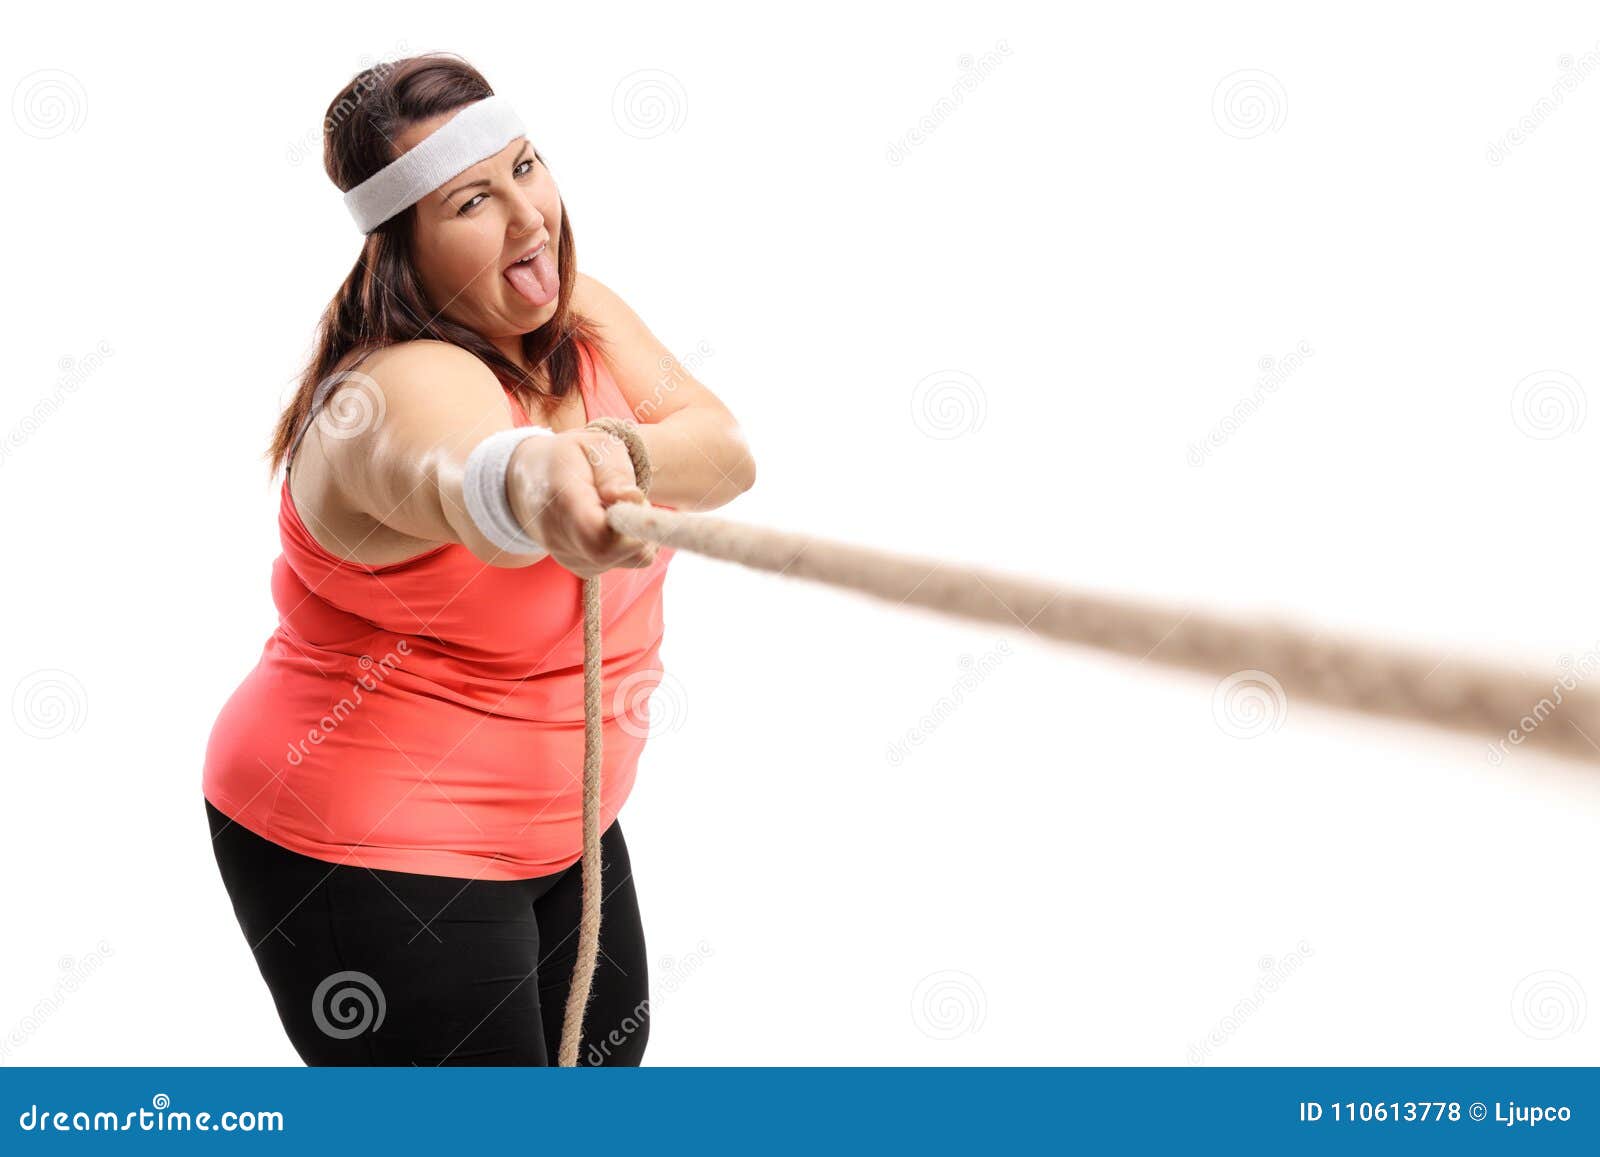 Tired Overweight Woman Pulling a Rope Stock Photo - Image of obesity,  chubby: 110613778